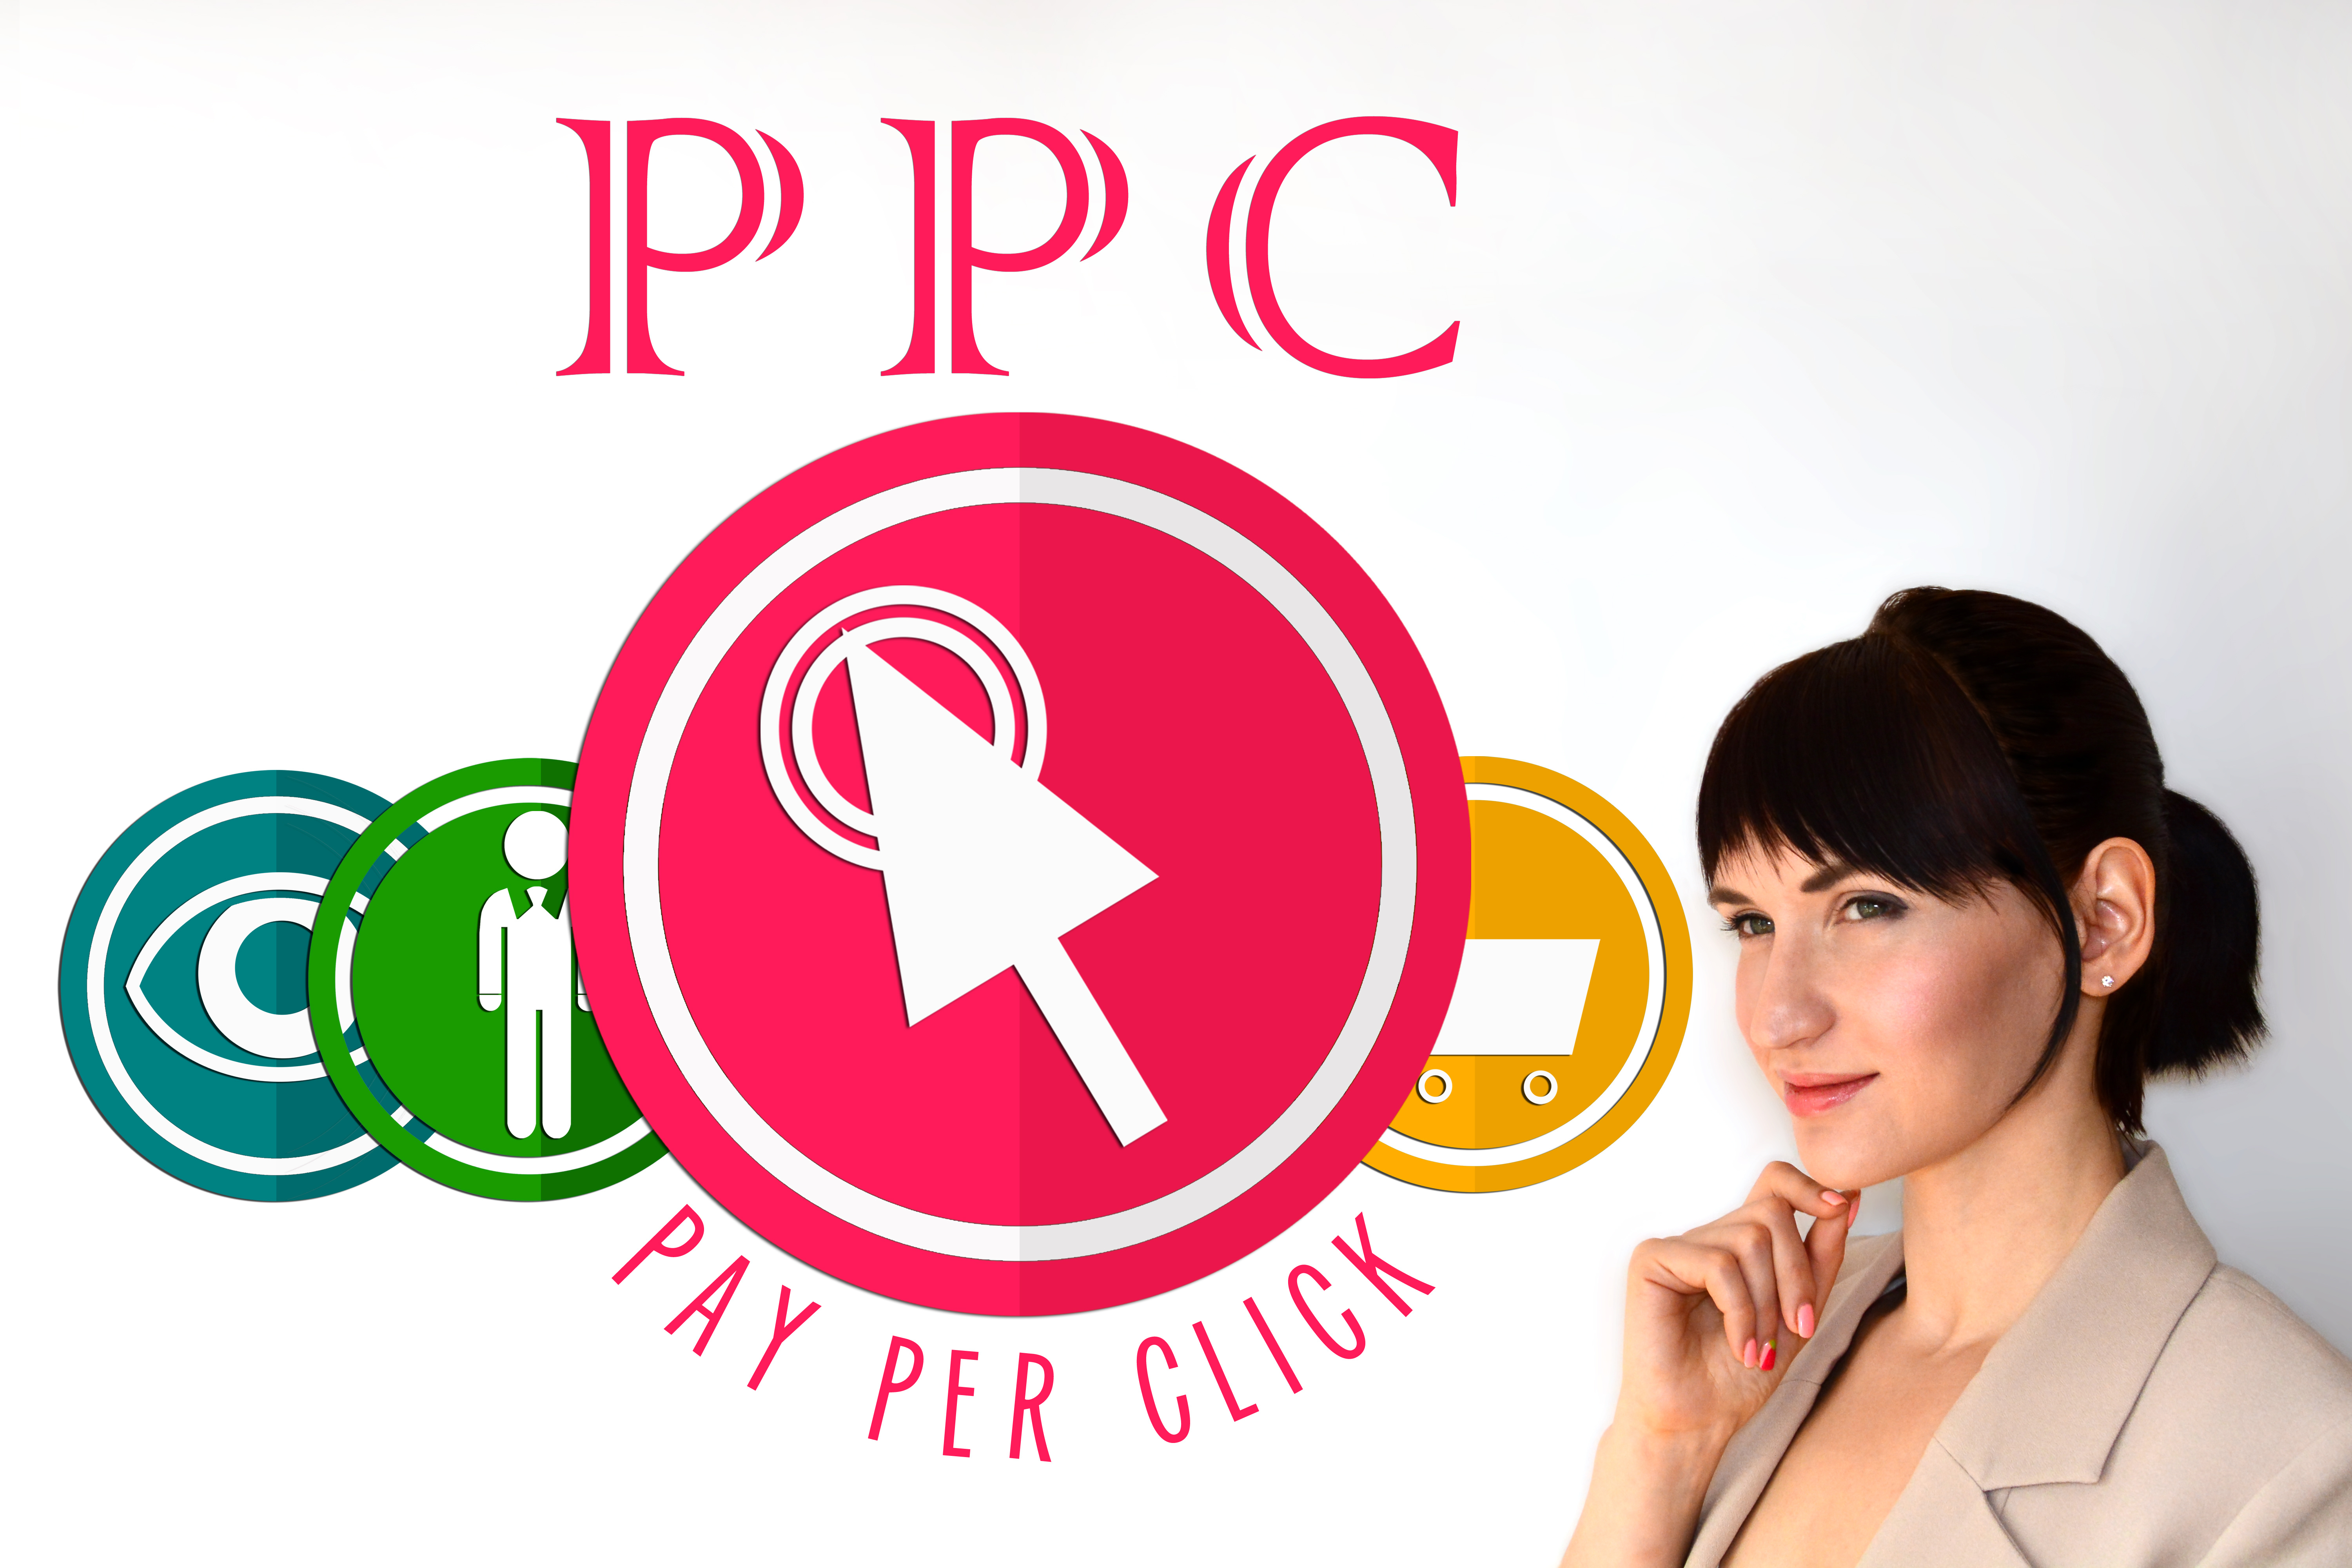 PPC. Pay per clic. PPC sign on white backround. PPC advertise